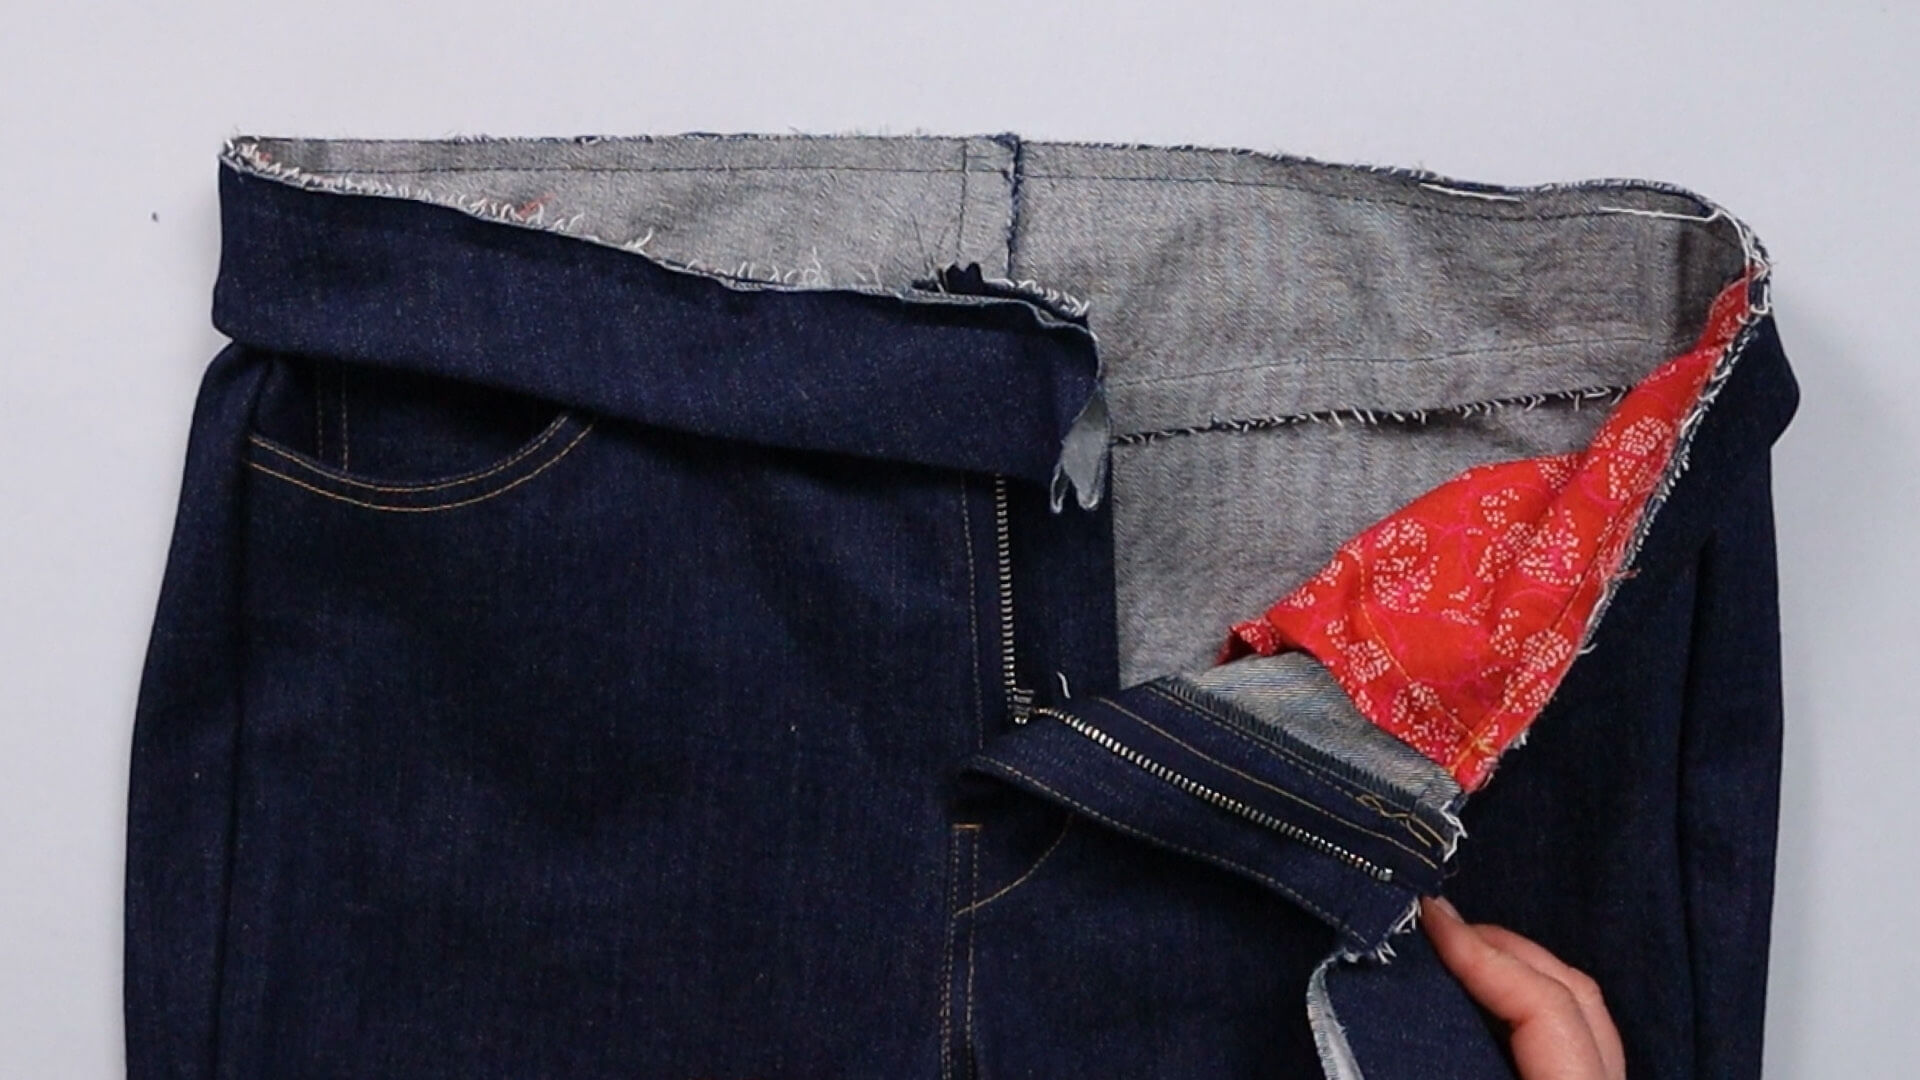 the waistband is sewn onto the jeans to try them on